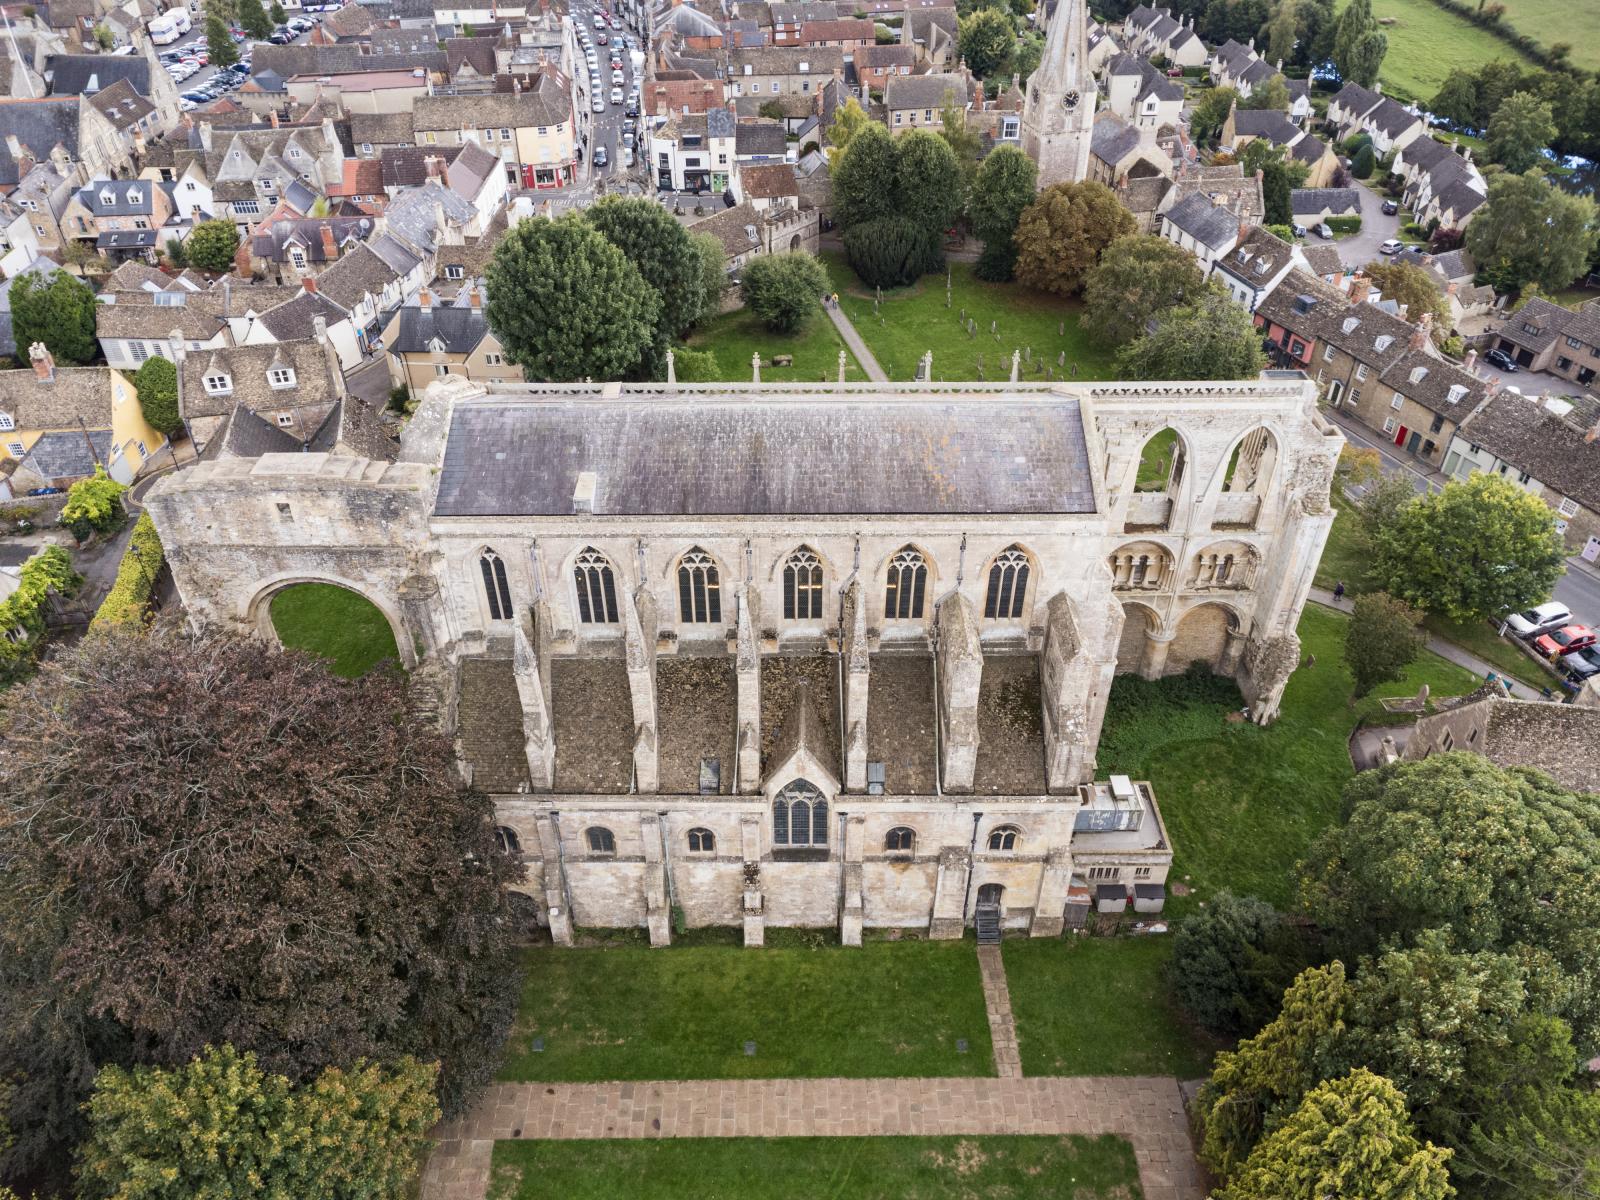 Aerial view of a large stone church with buttresses and arched windows. Ruined stonework at both ends suggests where the structure used to be much larger.